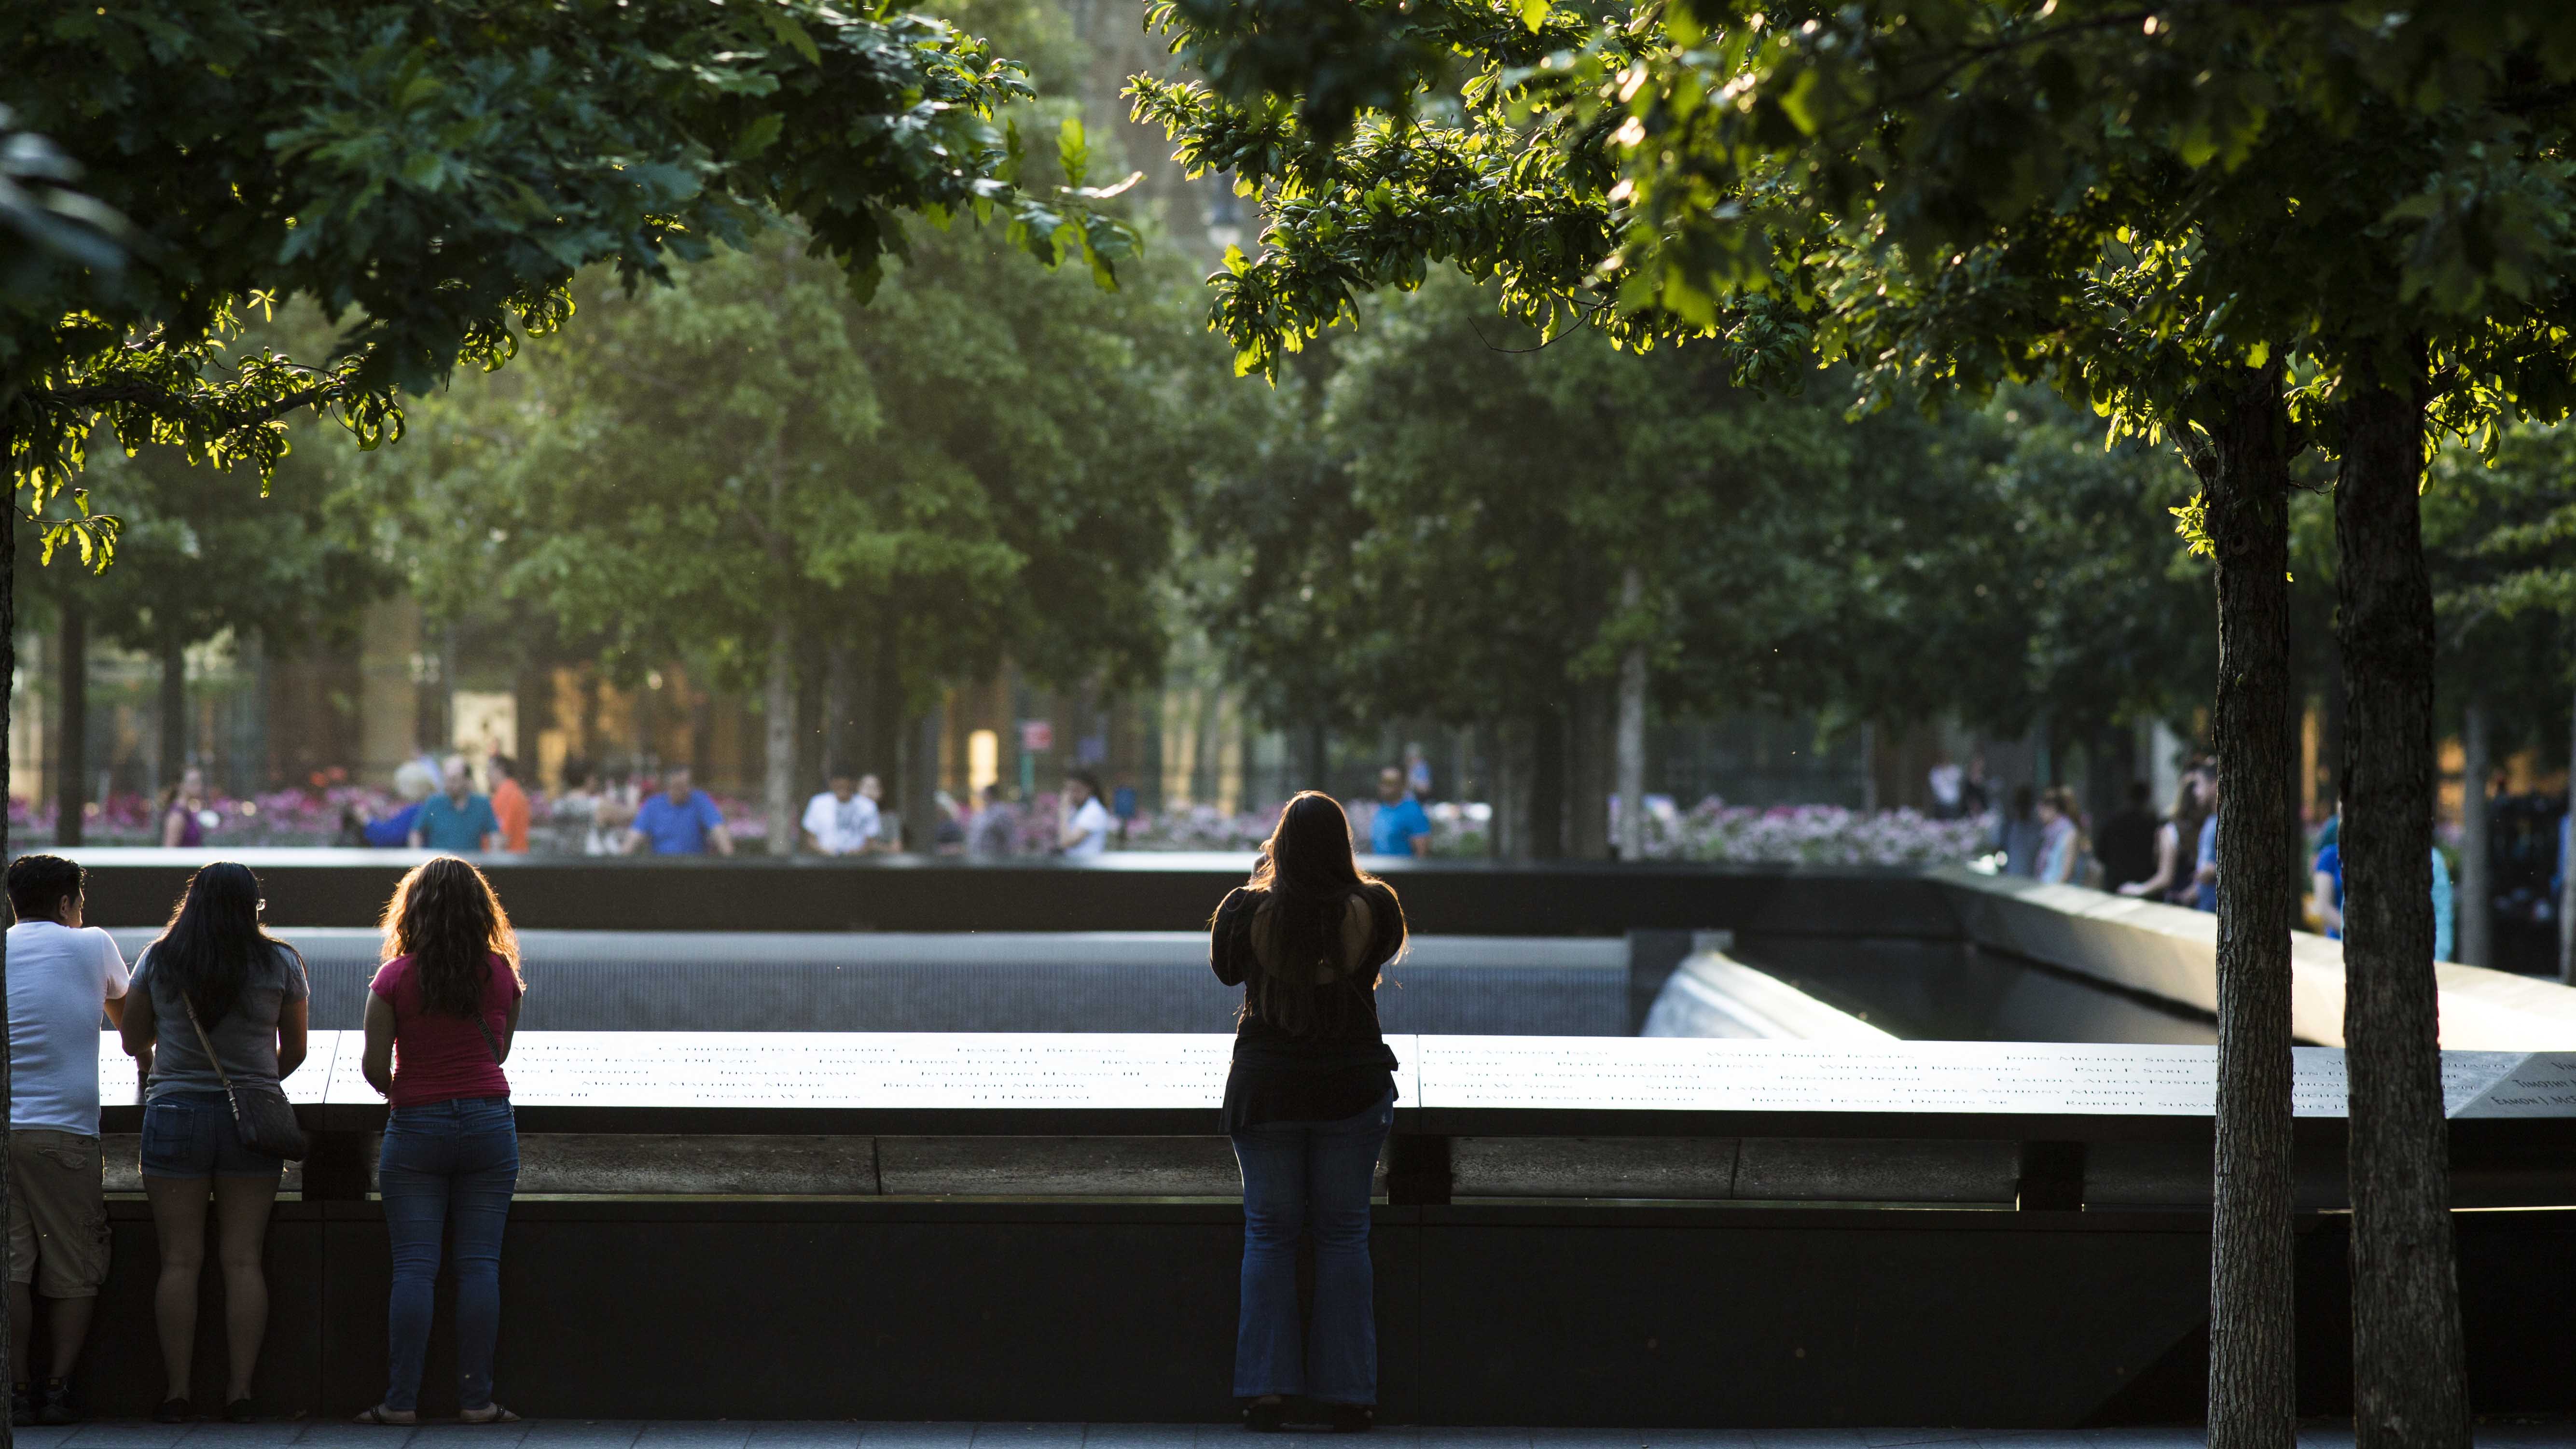 A woman is seen standing at the Memorial parapets at dusk.  She is standing alone with her back to the camera as she takes a photo.  